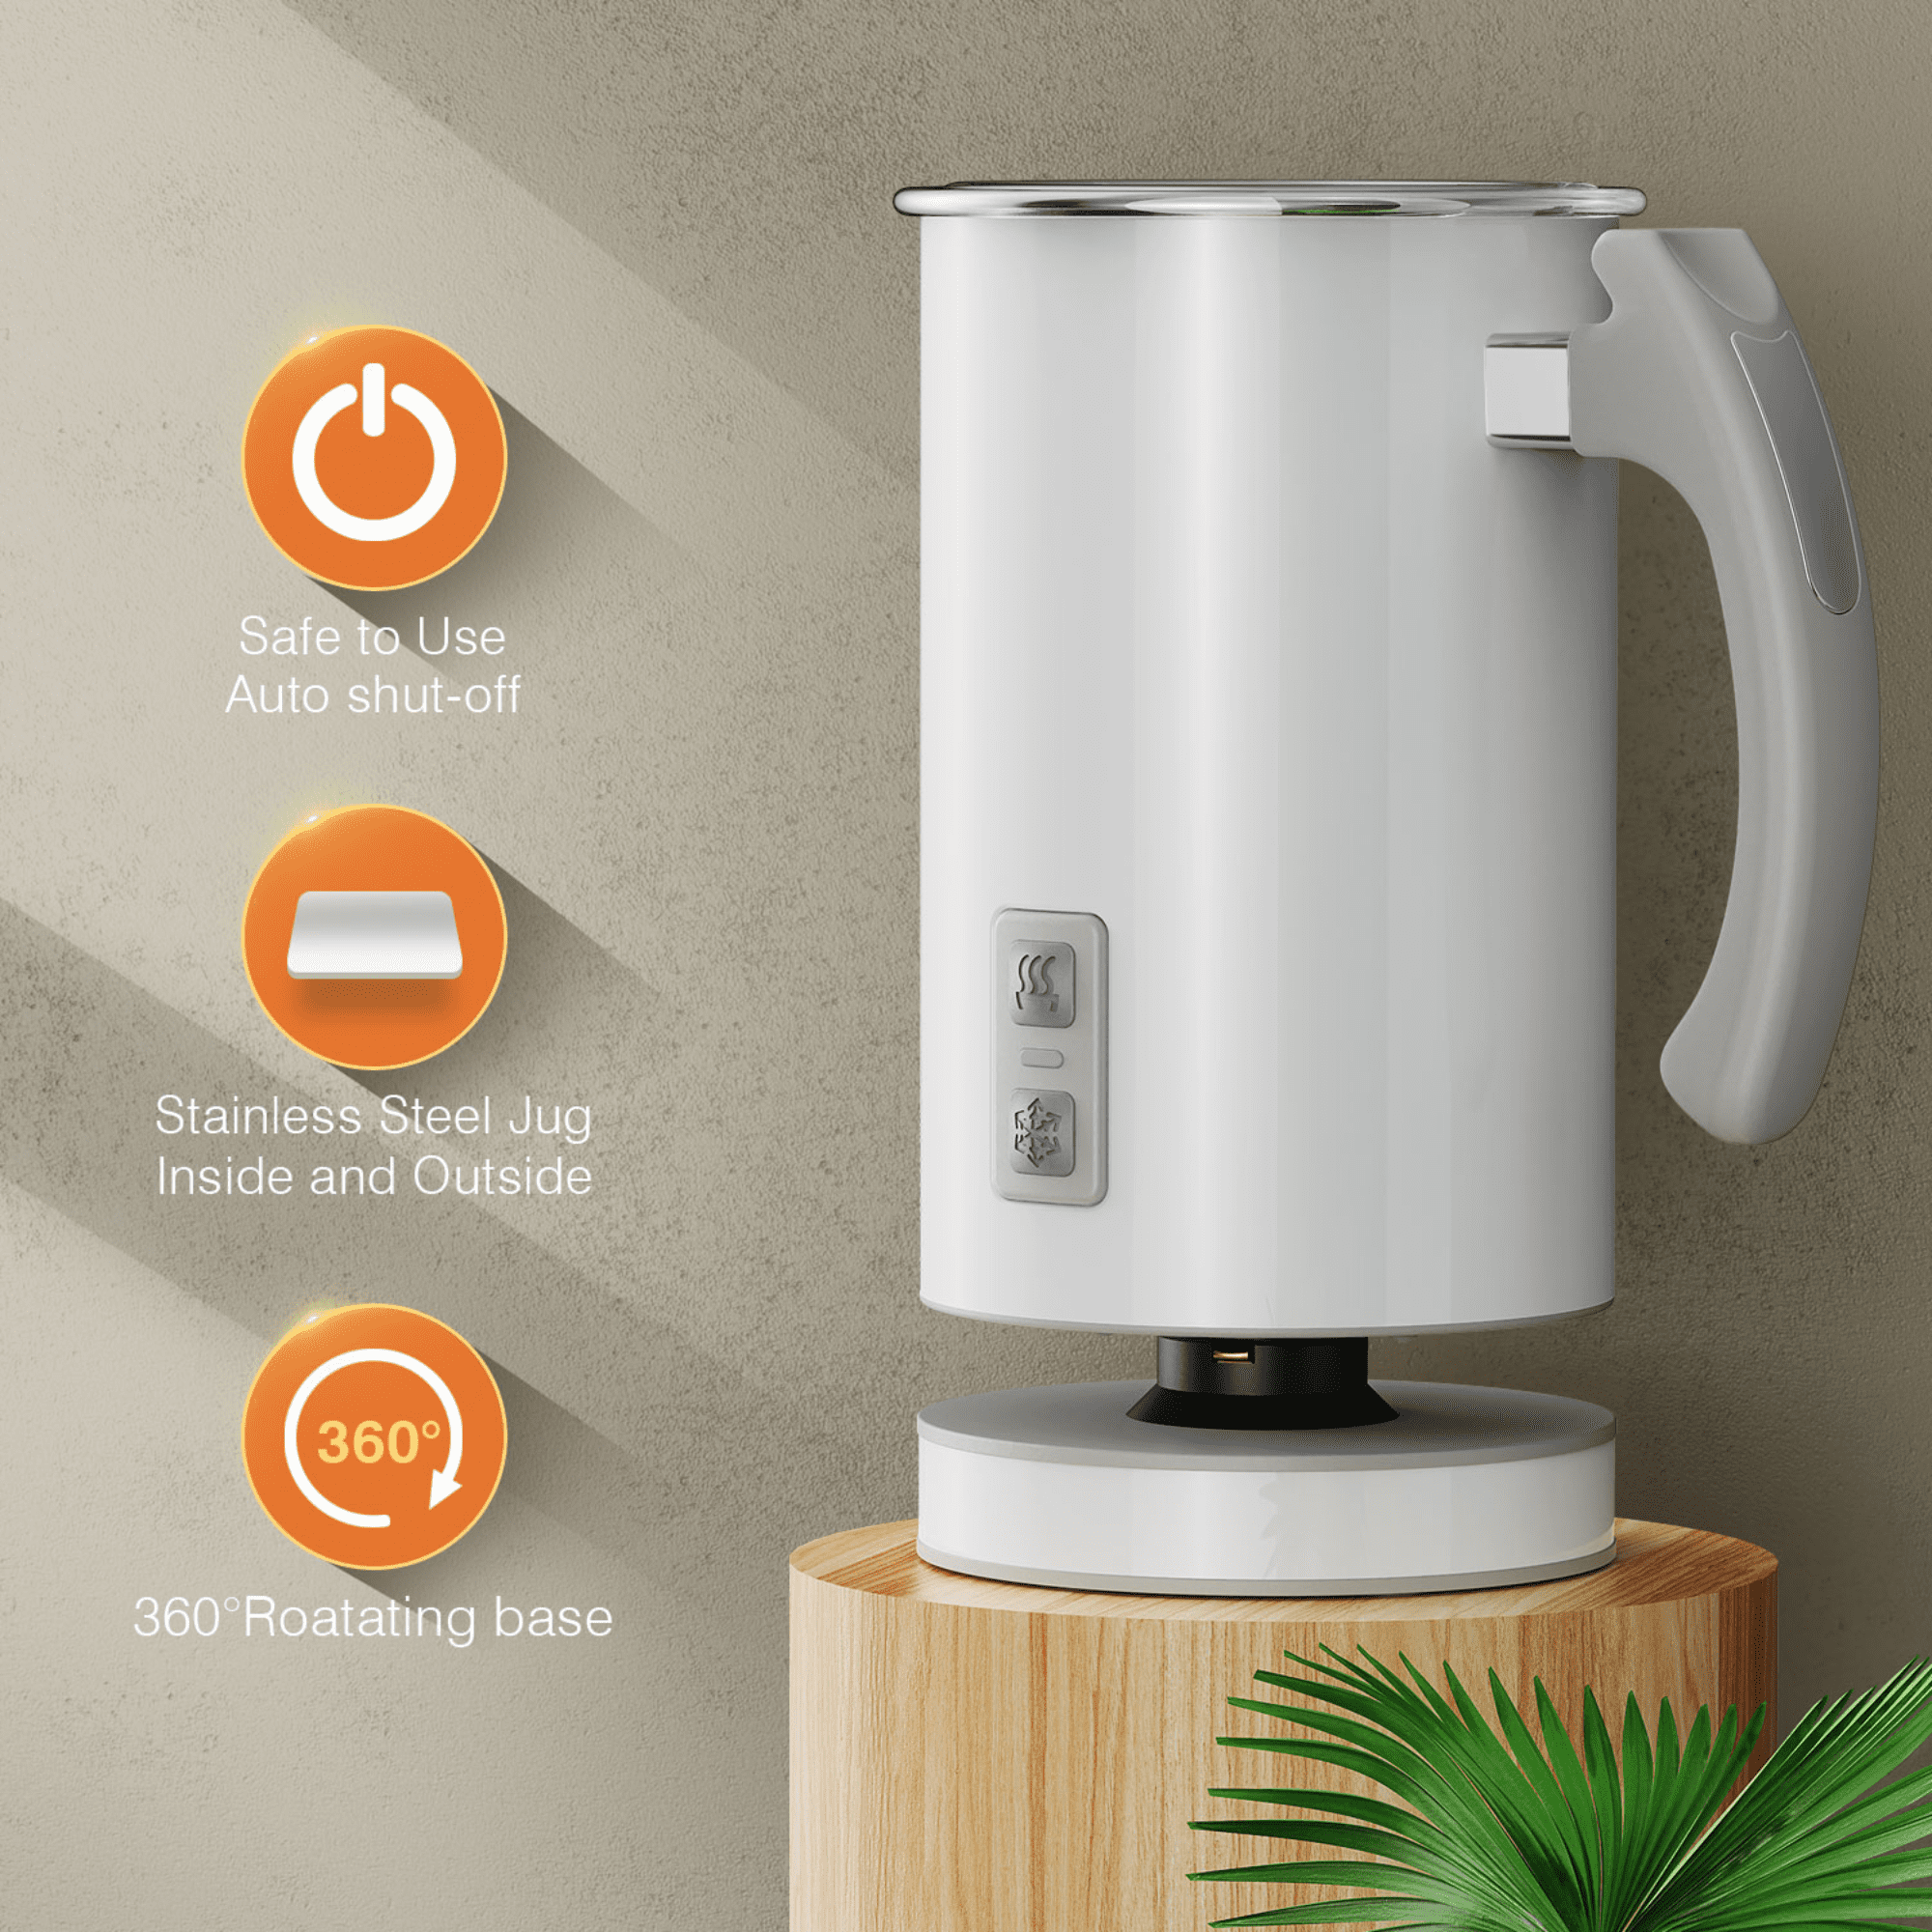 Milk Frother Machine, 4-in-1 Detachable Stainless Steel Hot & Cold Electric  Milk Warmer and Foam Maker with Smart Touch Control and Dishwasher Safe